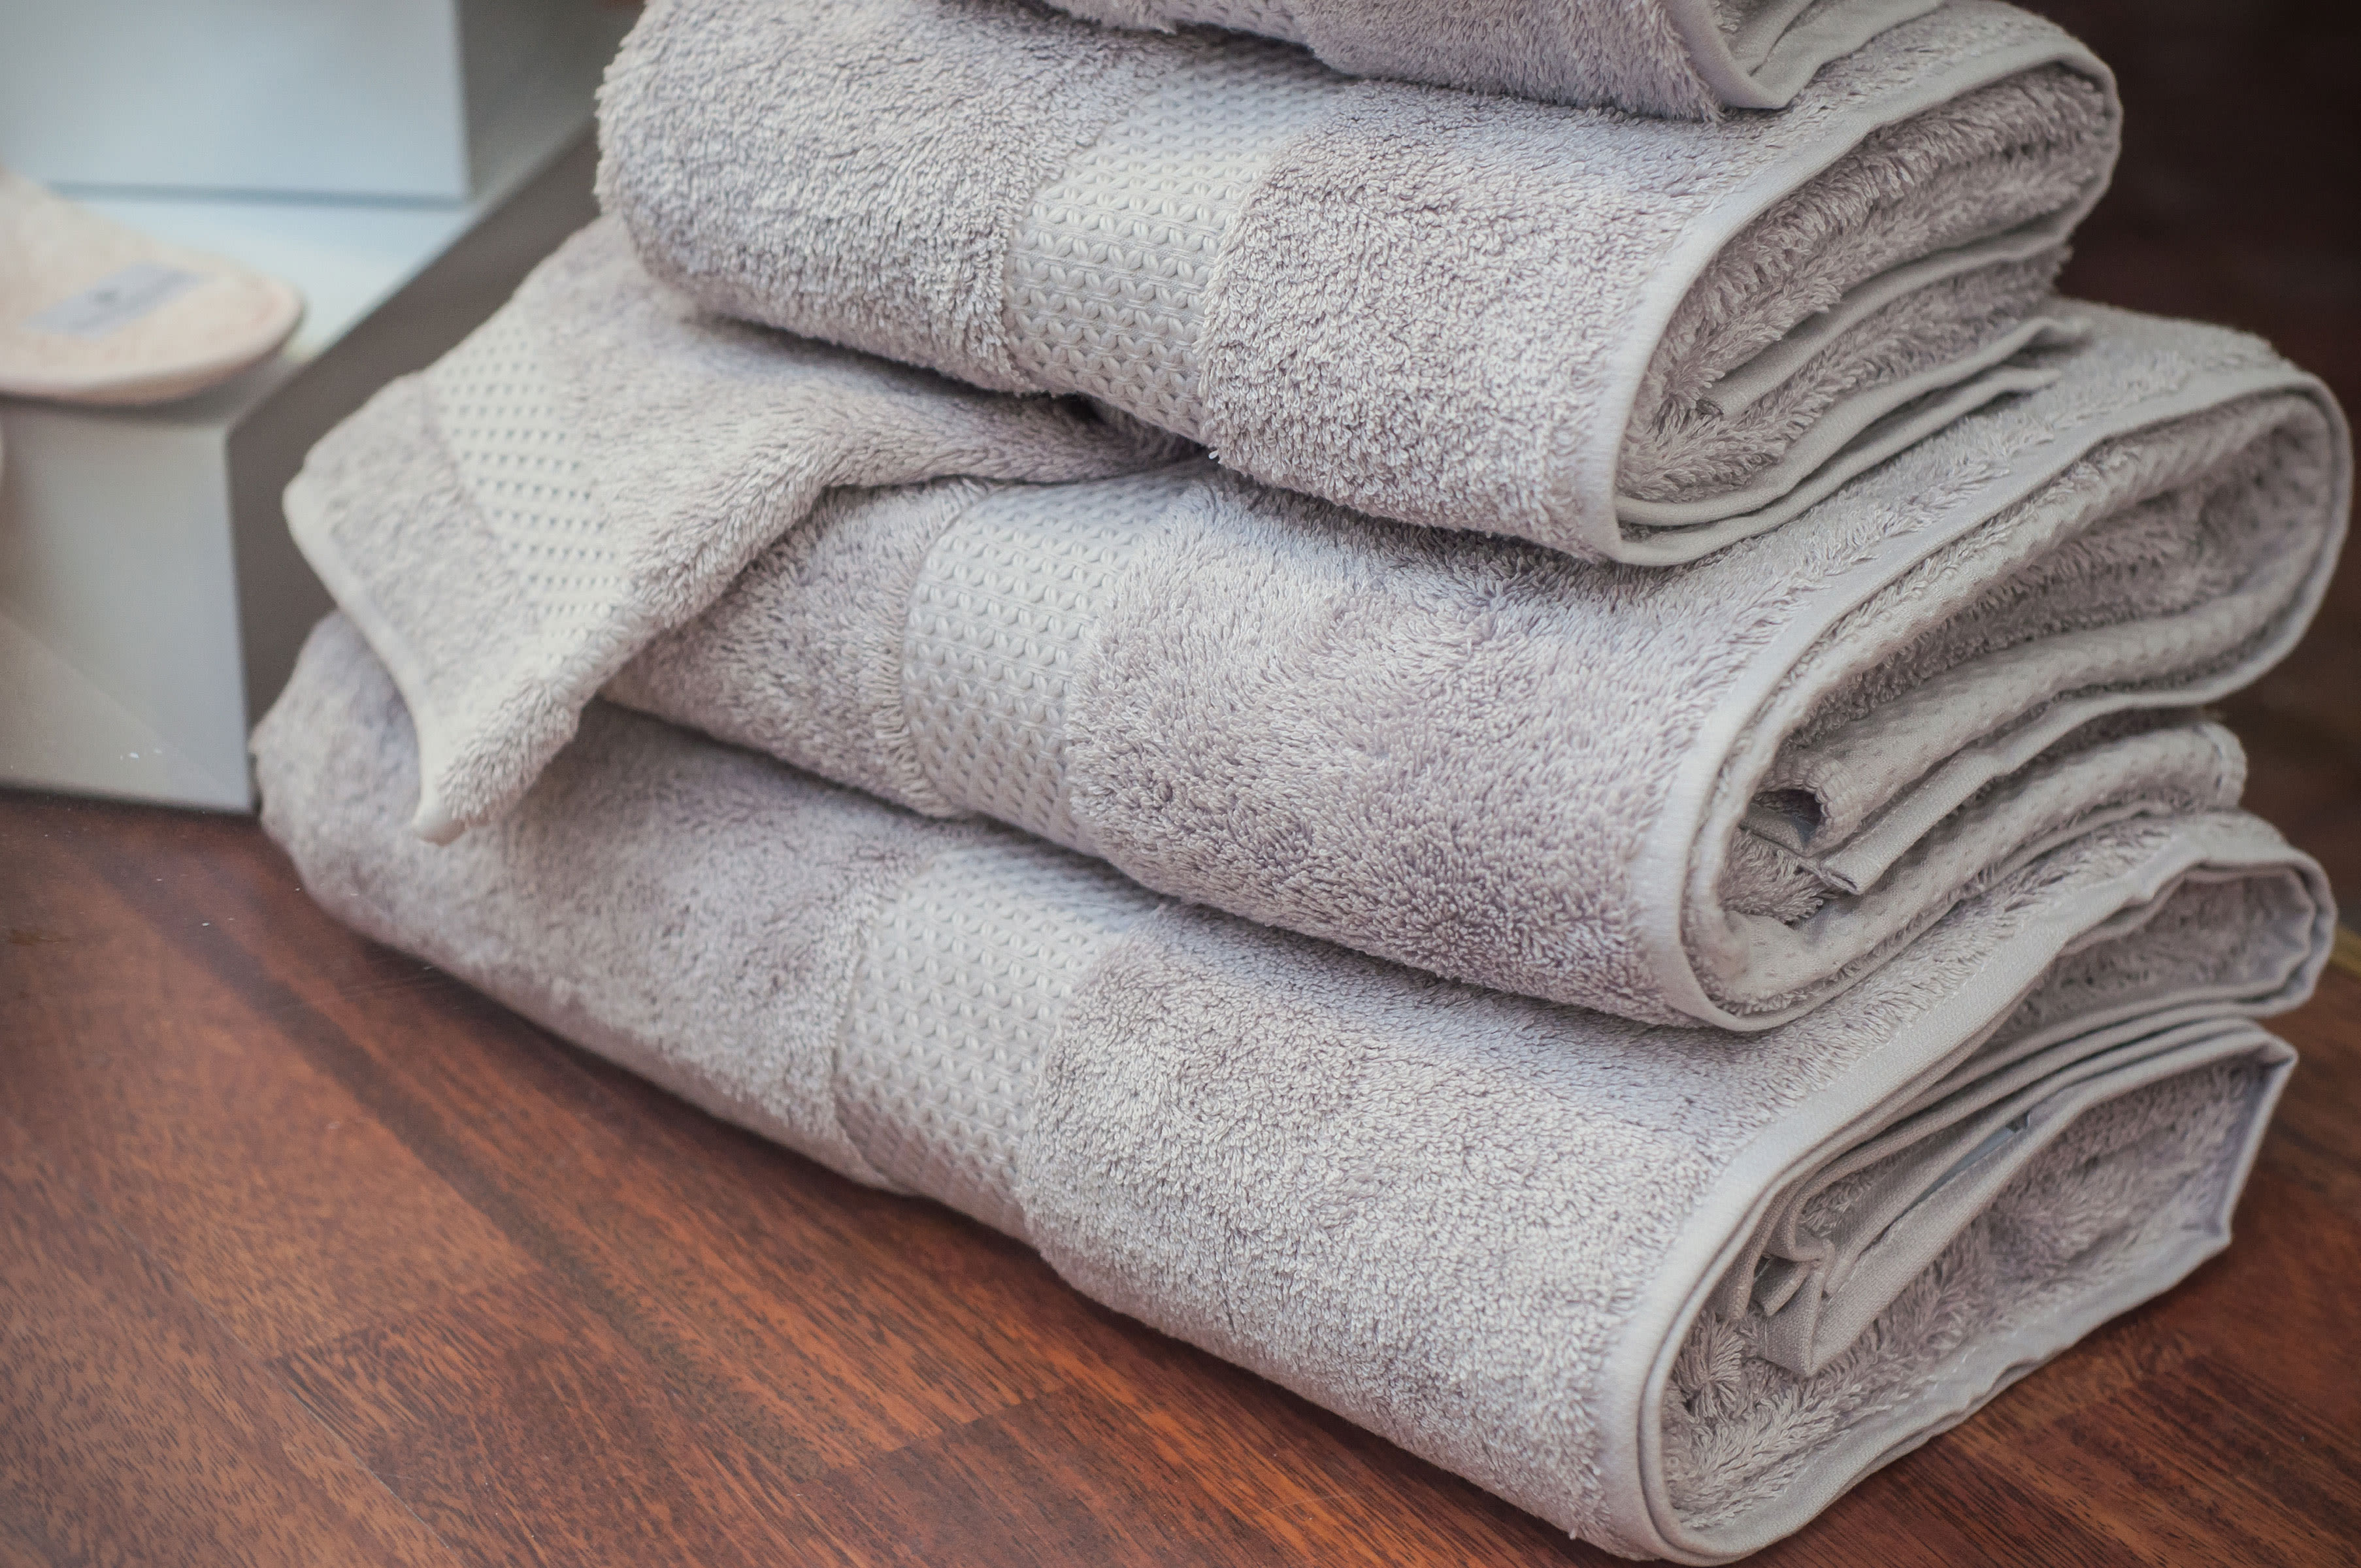 How to Break In Your Bath Towels: All About Your New Towels' Break-I